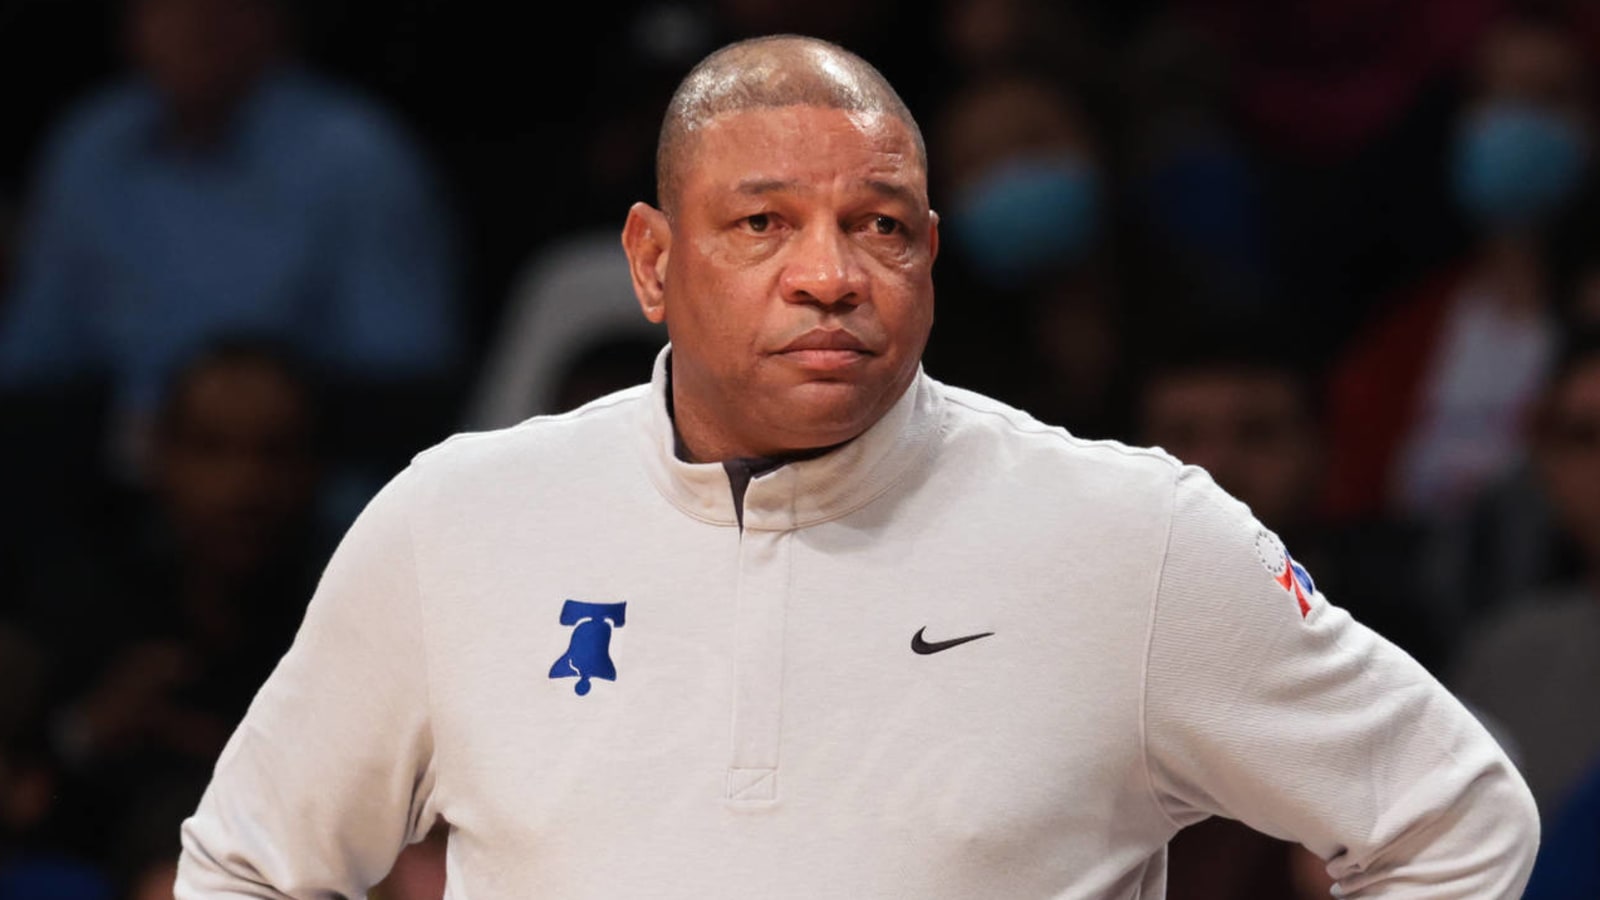 76ers HC Doc Rivers 'feels good' after entering COVID-19 protocols